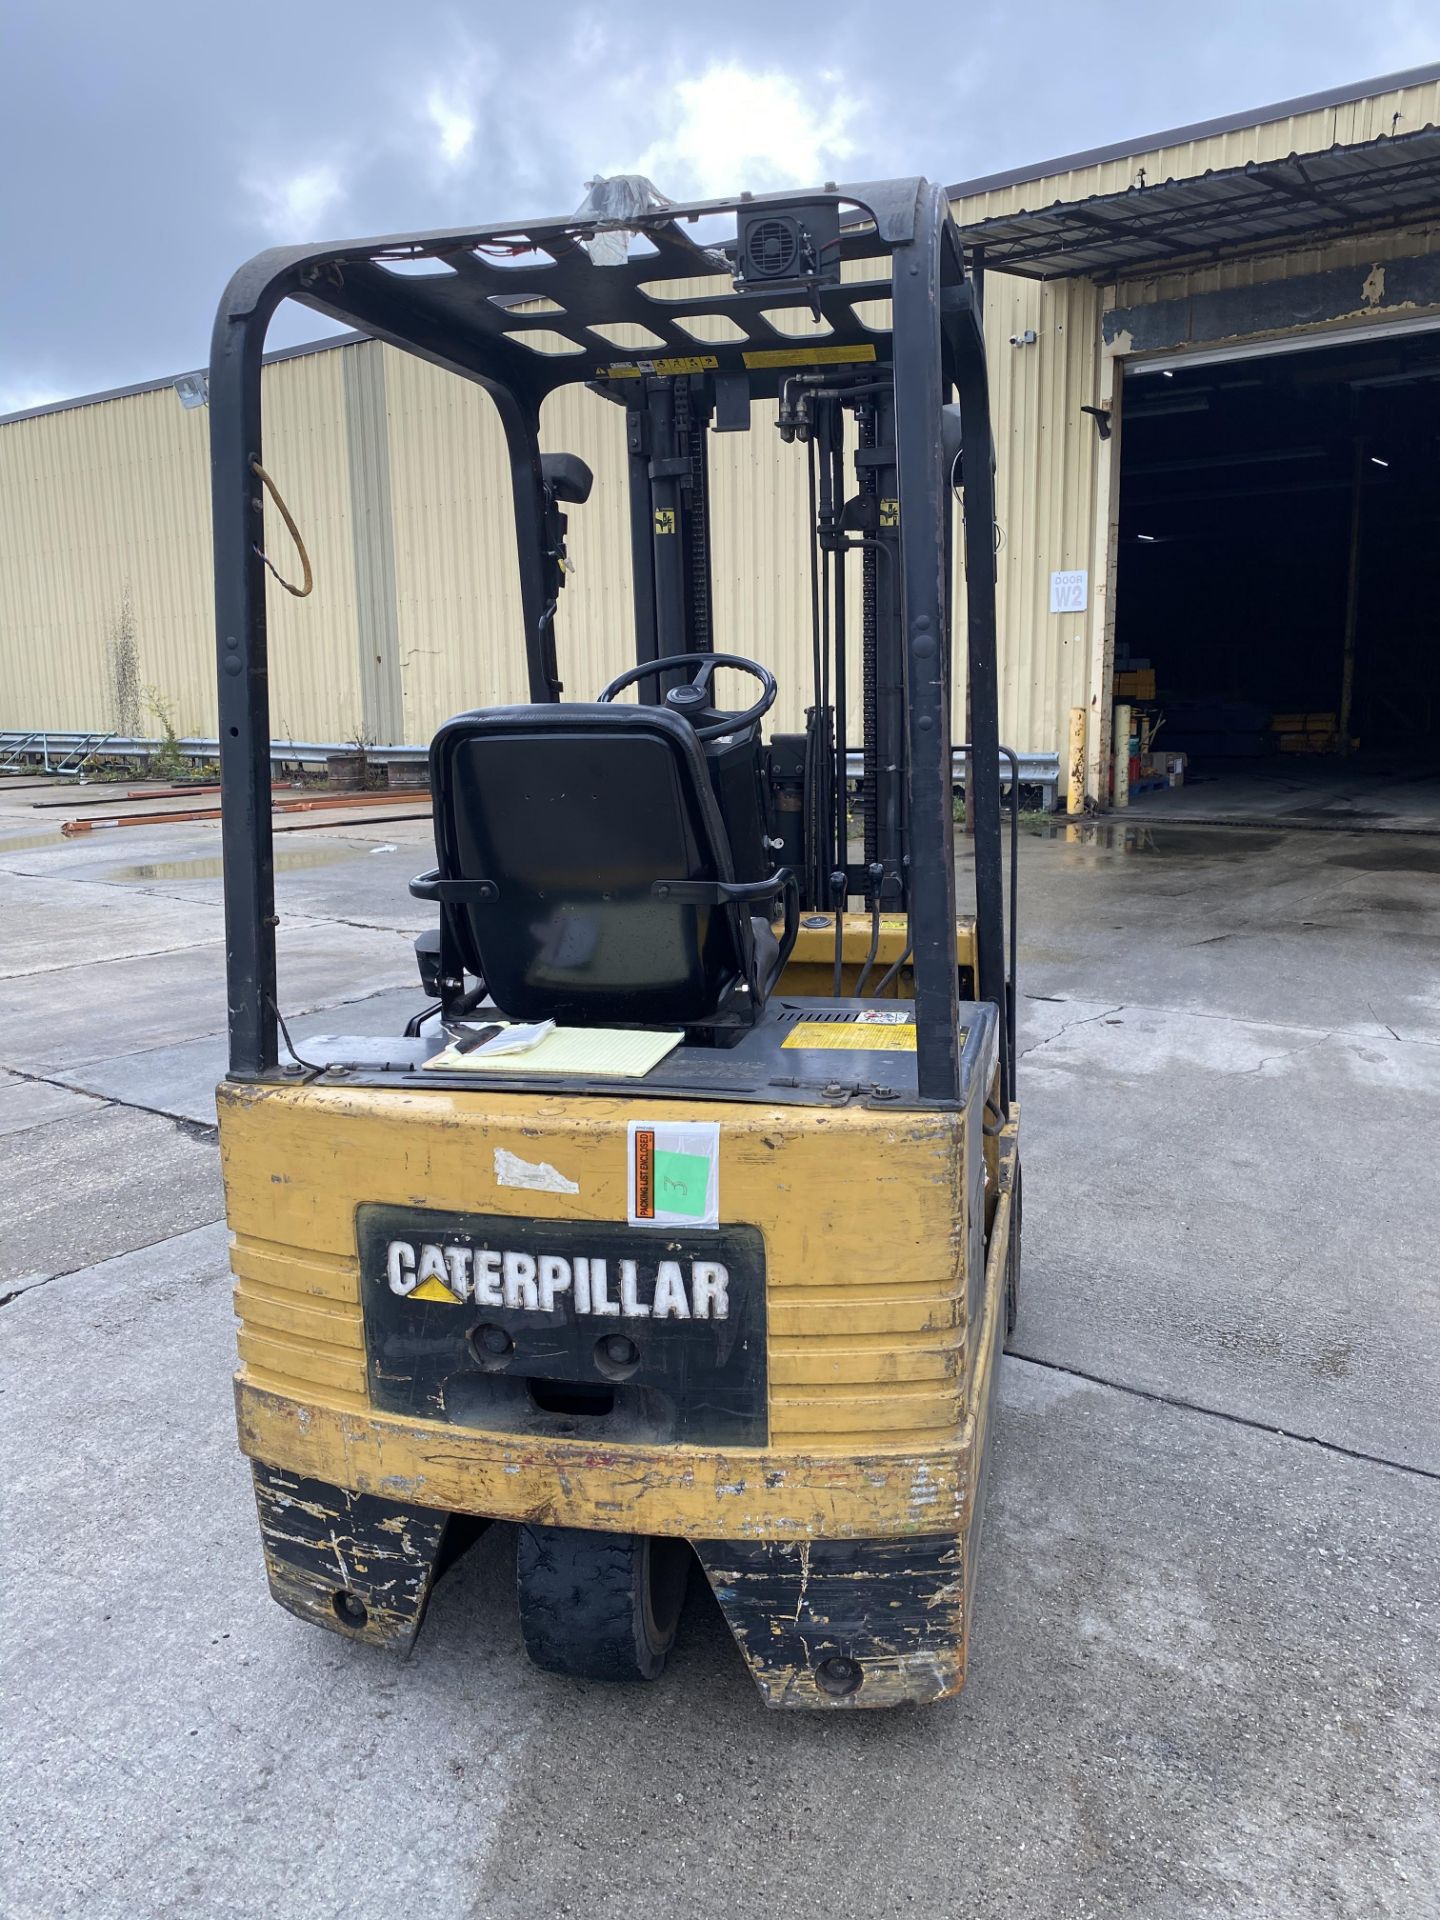 CATERPILLAR 3-WHEEL 3000 LBS CAPACITY ELECTRIC FORKLIFT - Image 5 of 5